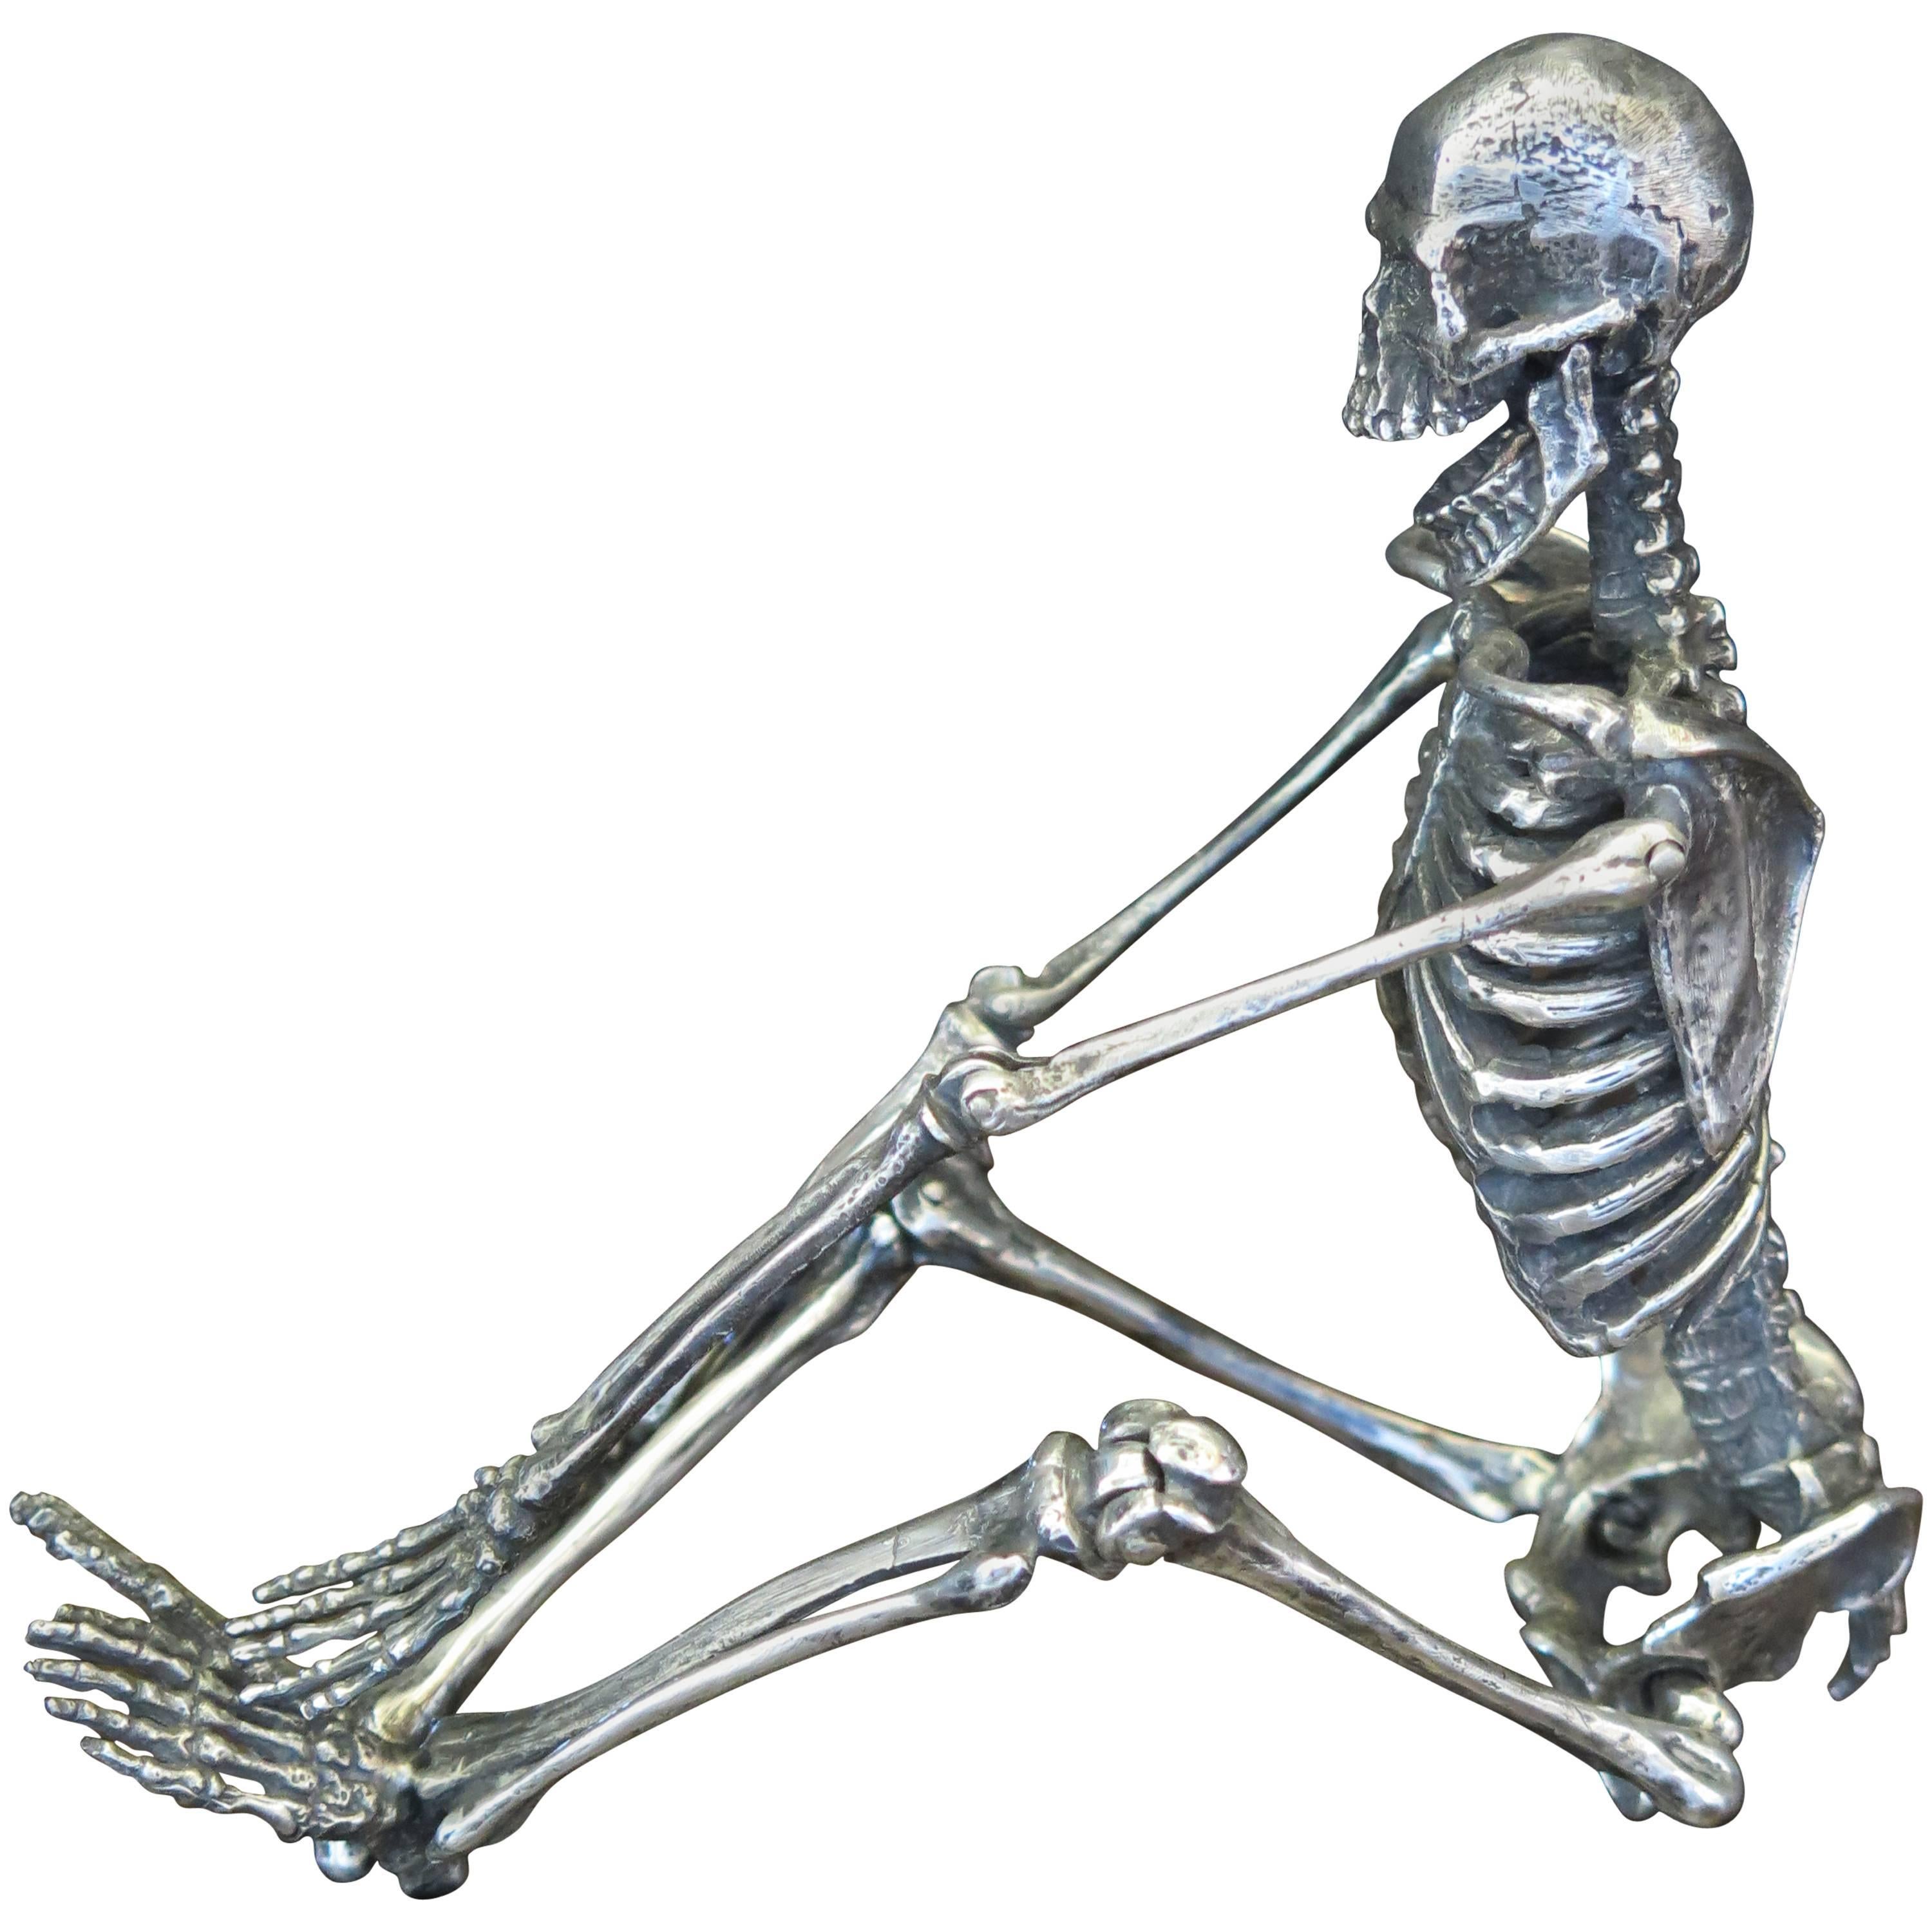 Whimsical Articulated Sterling Silver Model of a Skeleton